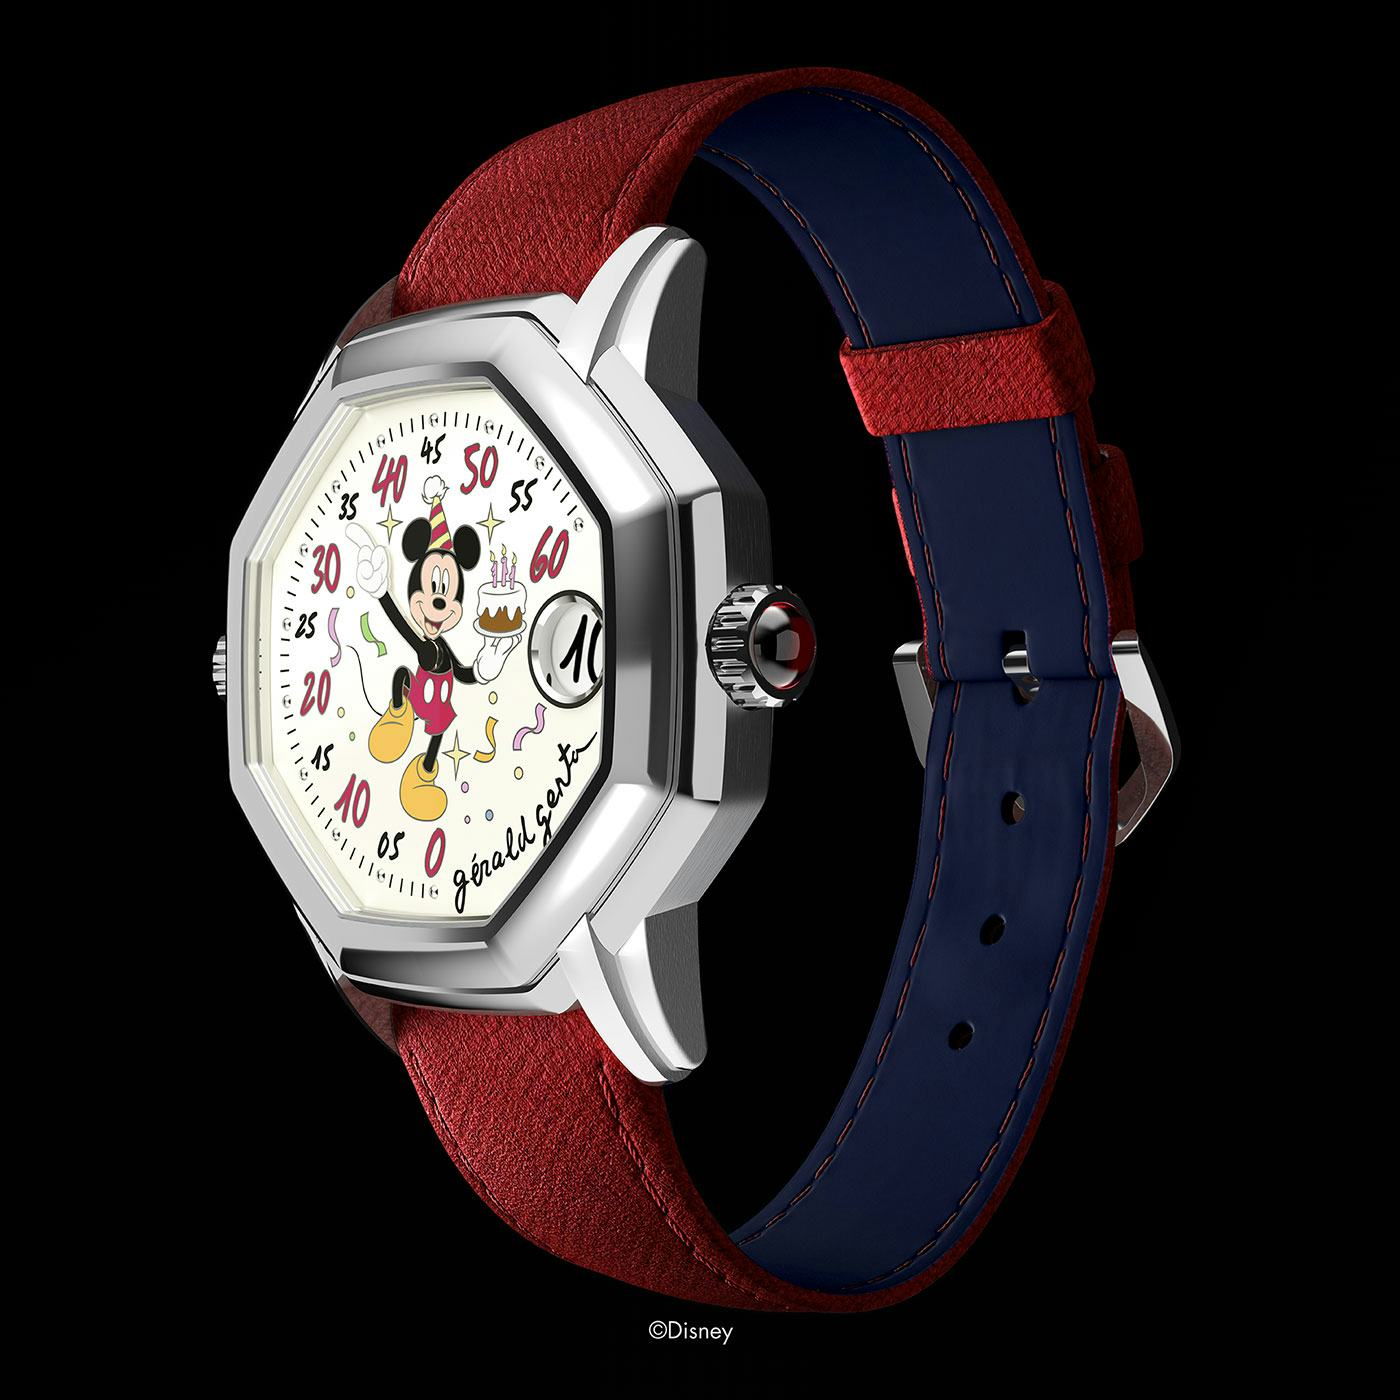 Gerald Genta's Watch Brand Is Being Revived Thanks to LVMH – Robb